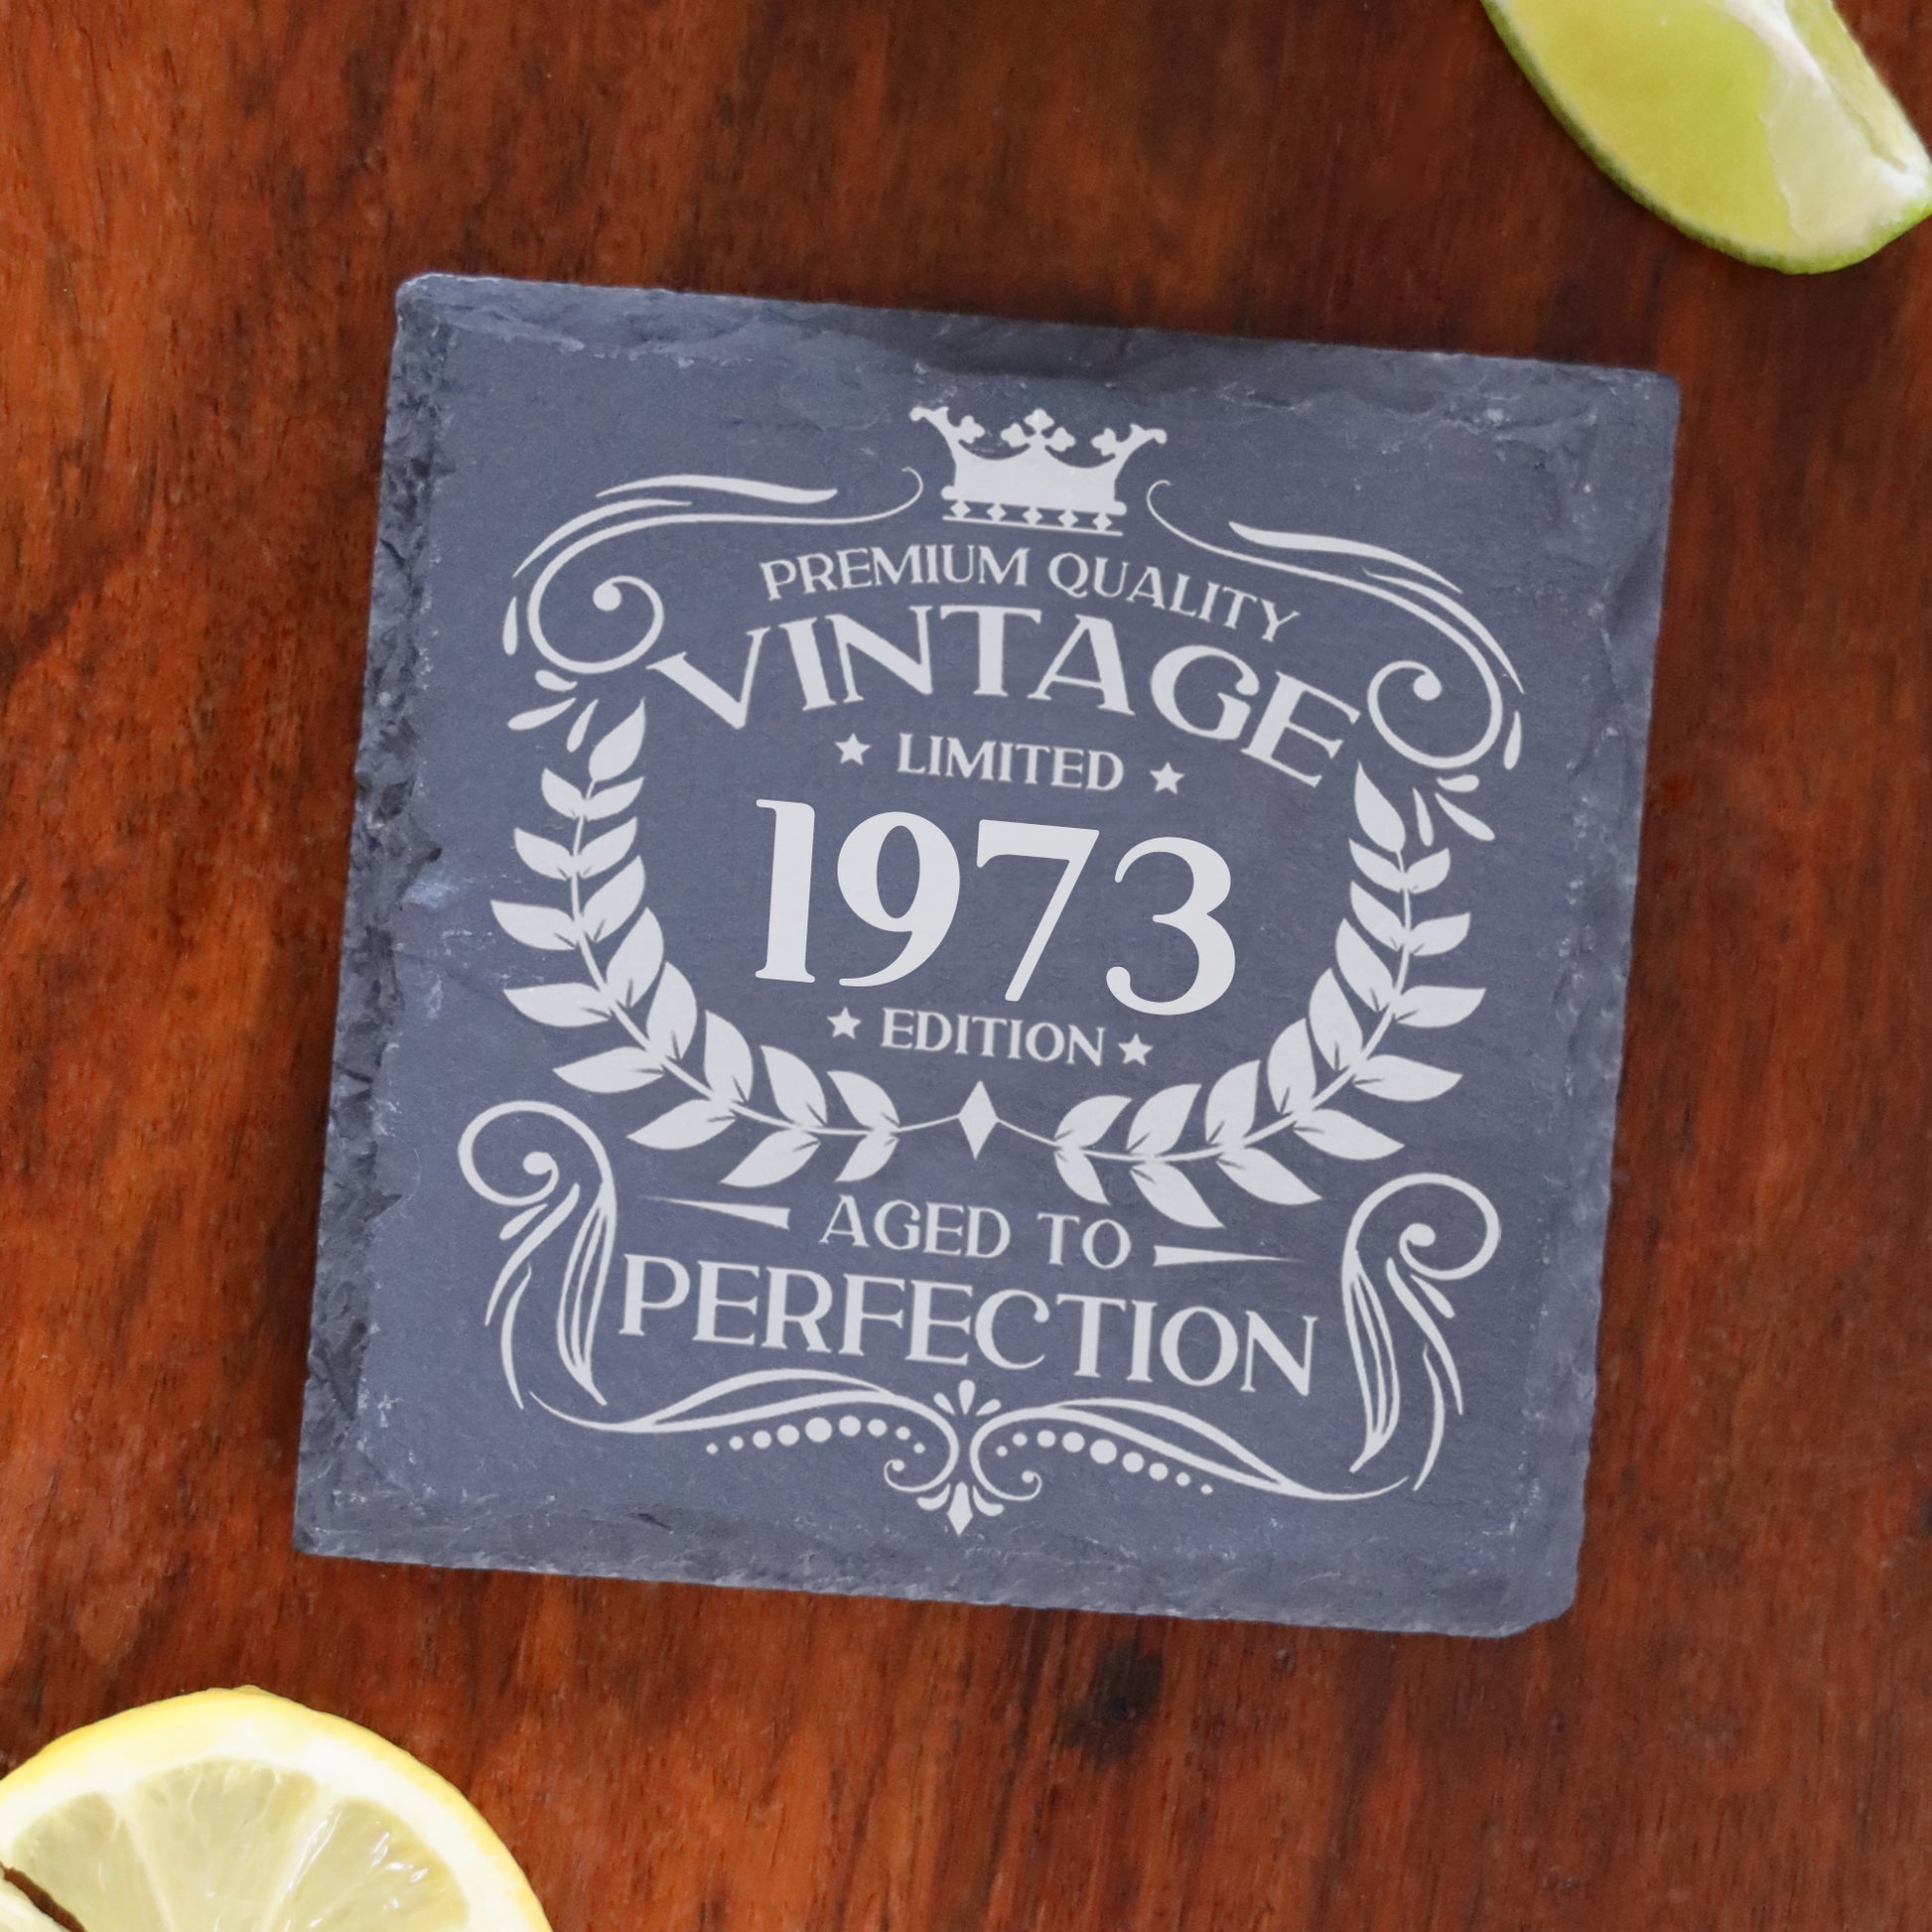 Personalised Vintage 1973 Mug and/or Coaster  - Always Looking Good - Square Coaster On Its Own  